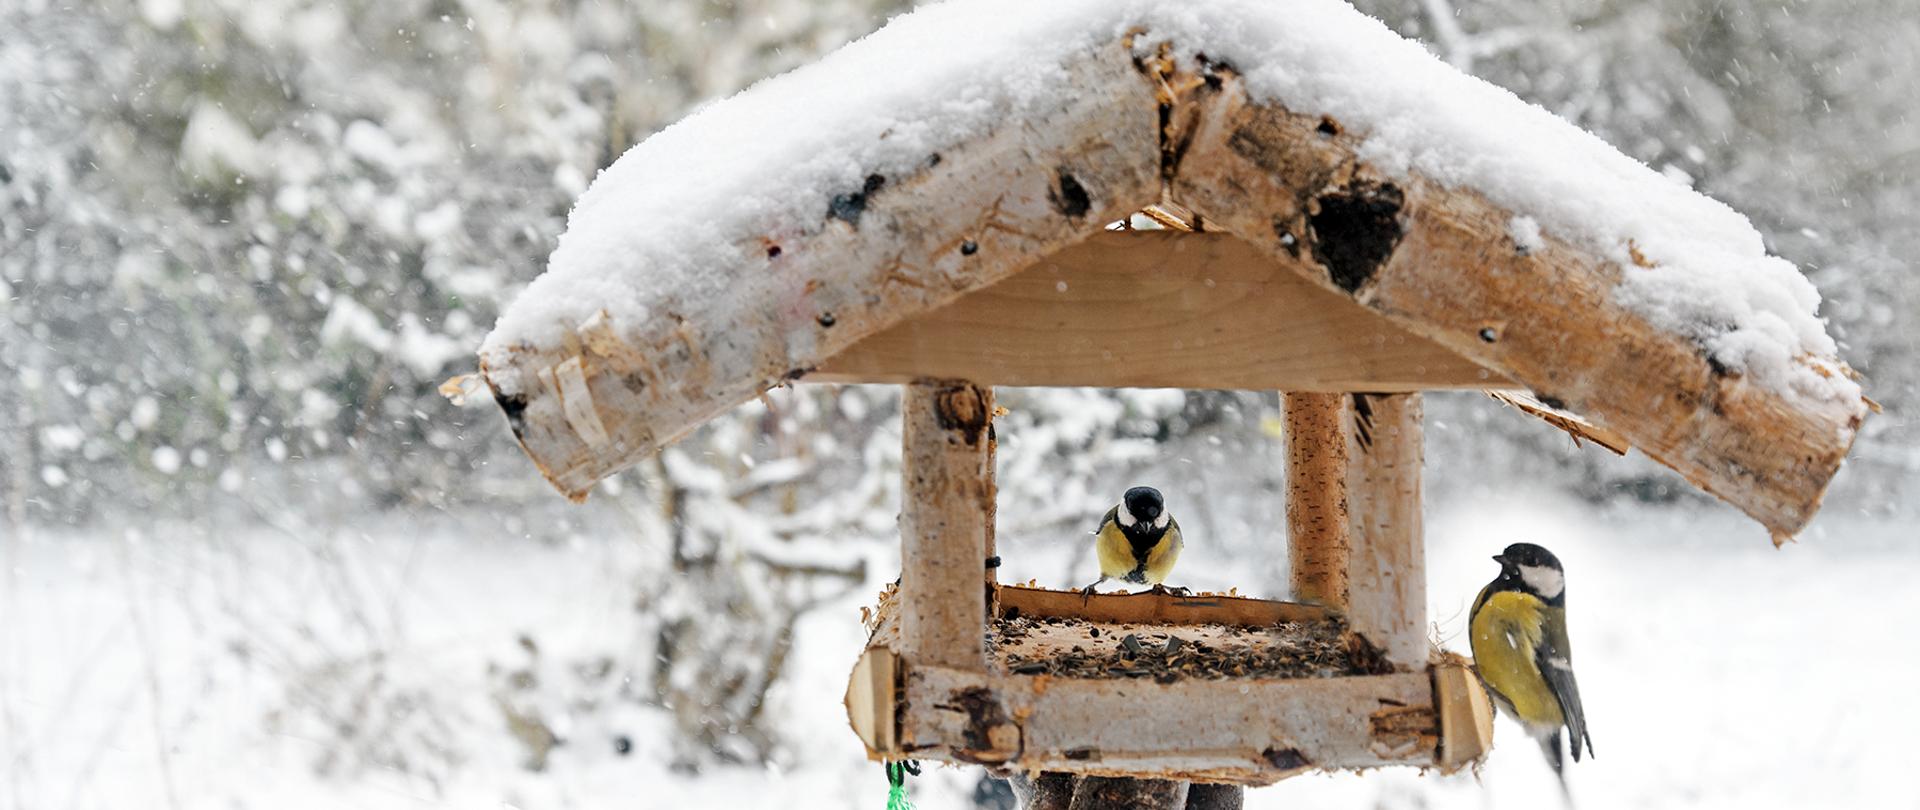 birdseed house with coal tits in the snow, copy space, selected focus, narrow depth of field